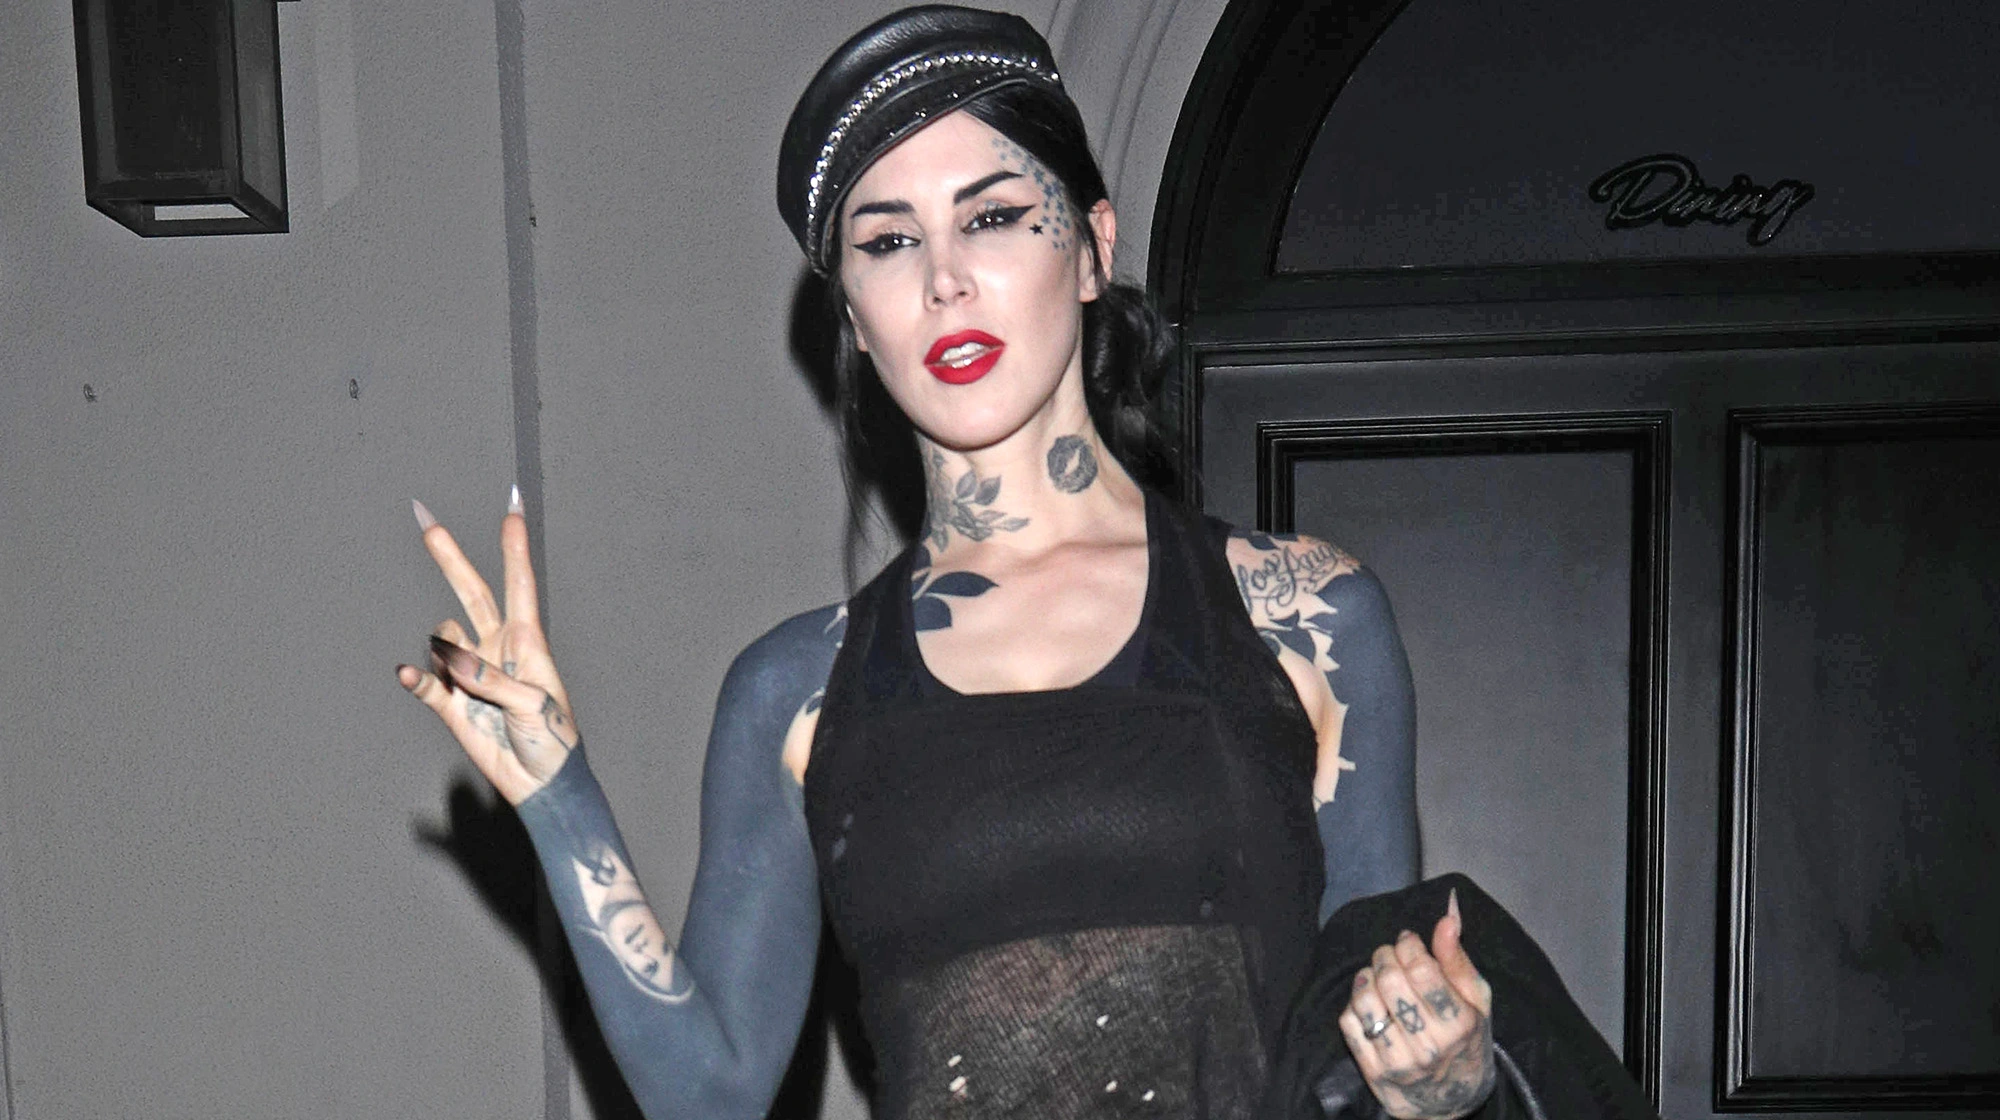 Kat Von D Spent Almost 40 Hours, ‘Blacking Out’ Tattoos She No Longer Wants